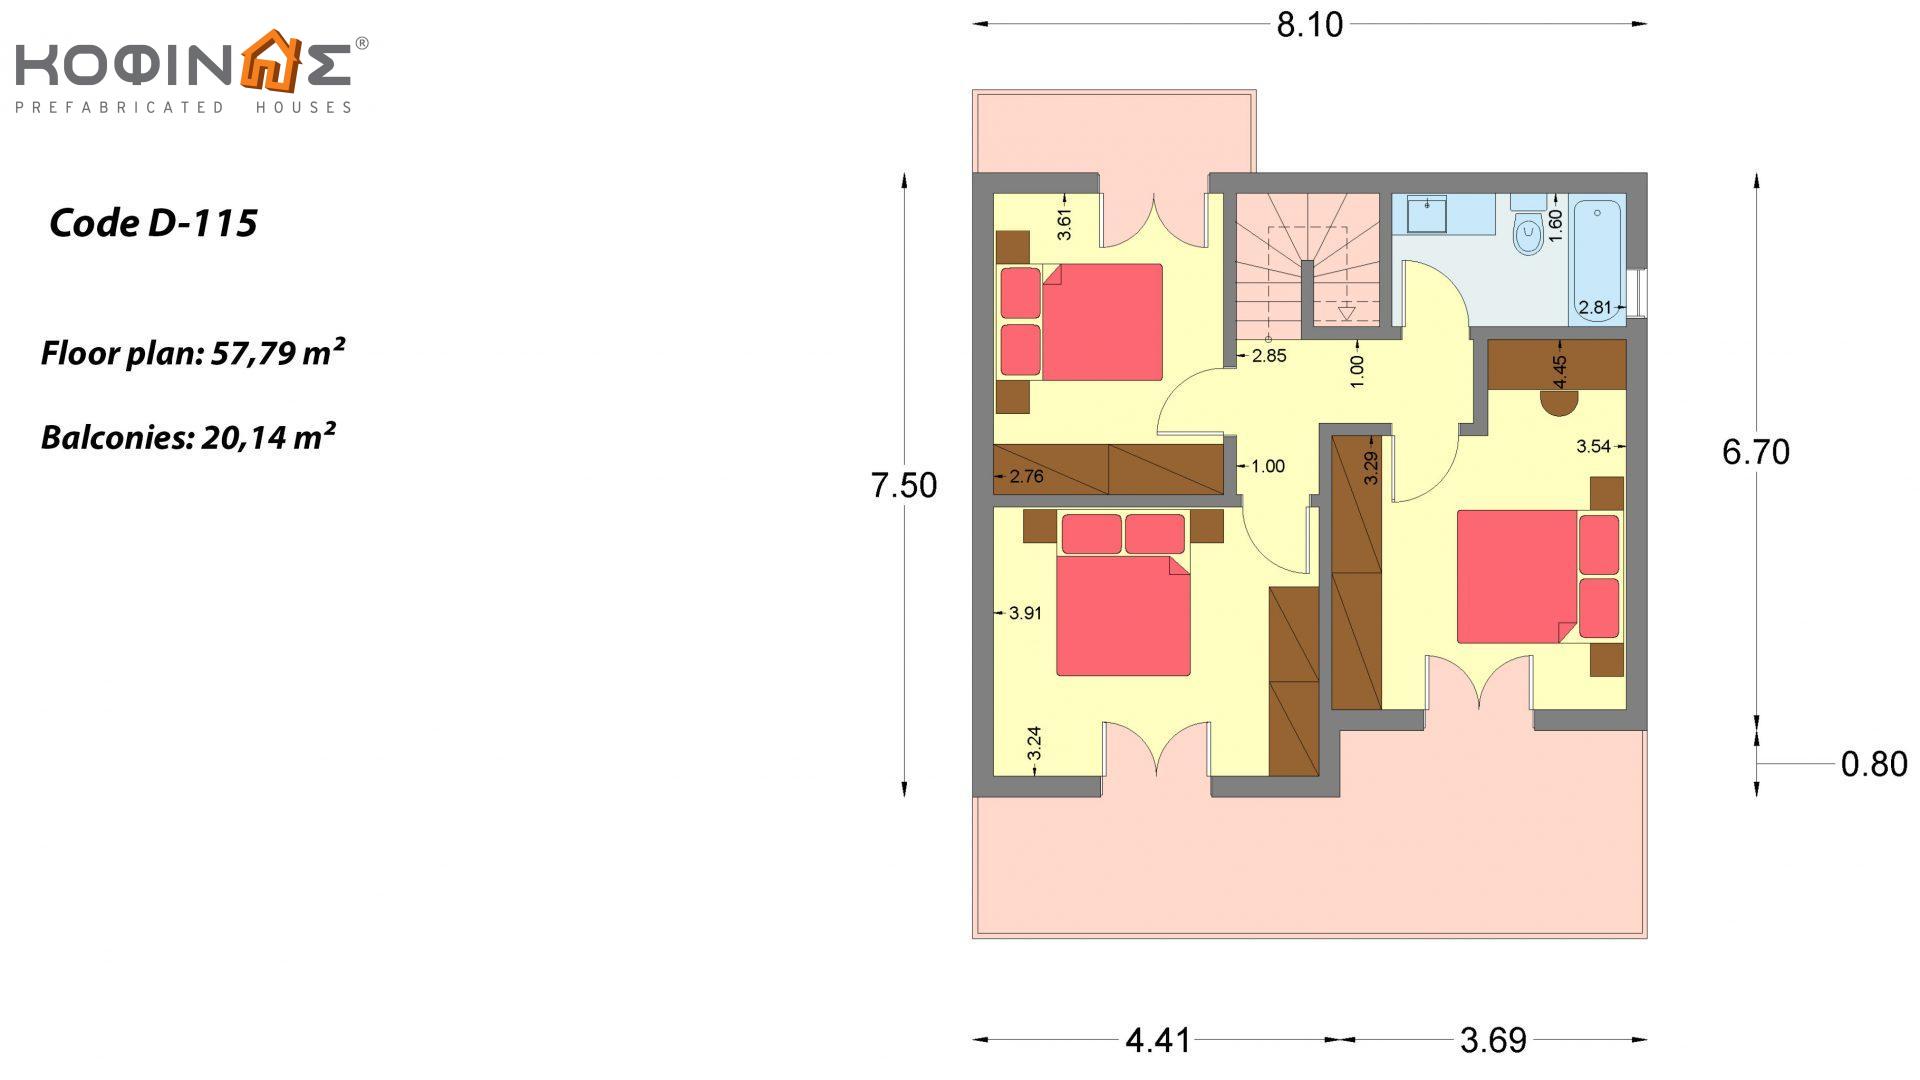 2-story house D-115, total surface of 115,58 m²,roofed areas 24,33 m²,balconies 20,14 m²